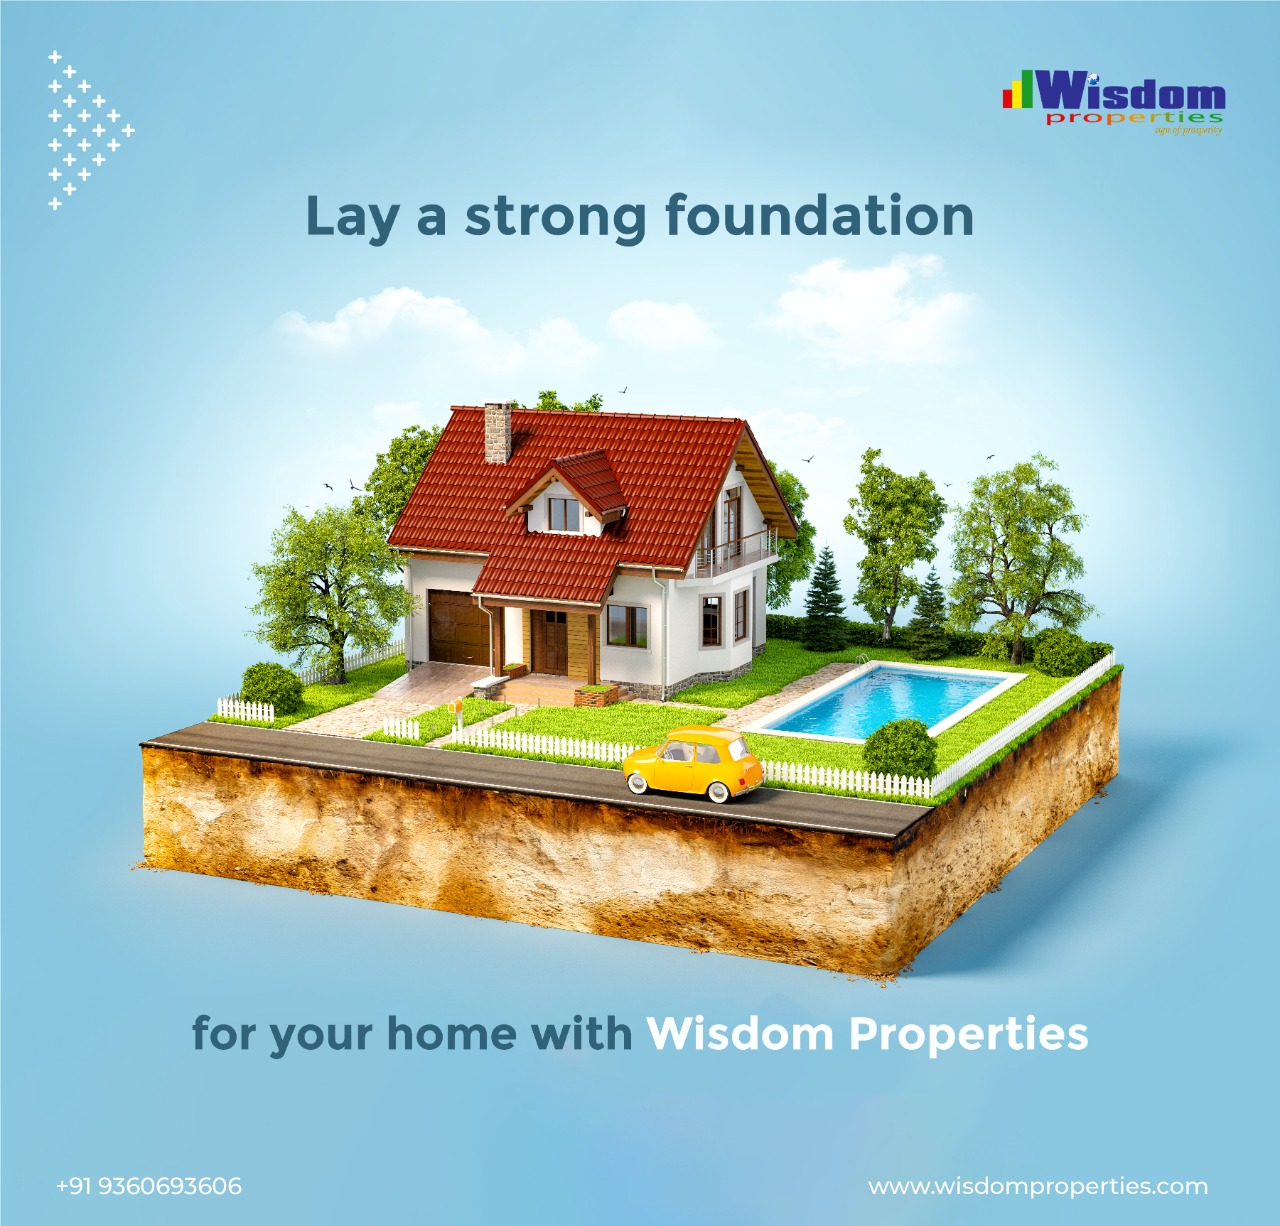 Wisdom properties with lay the foundation to improve the infrastructure